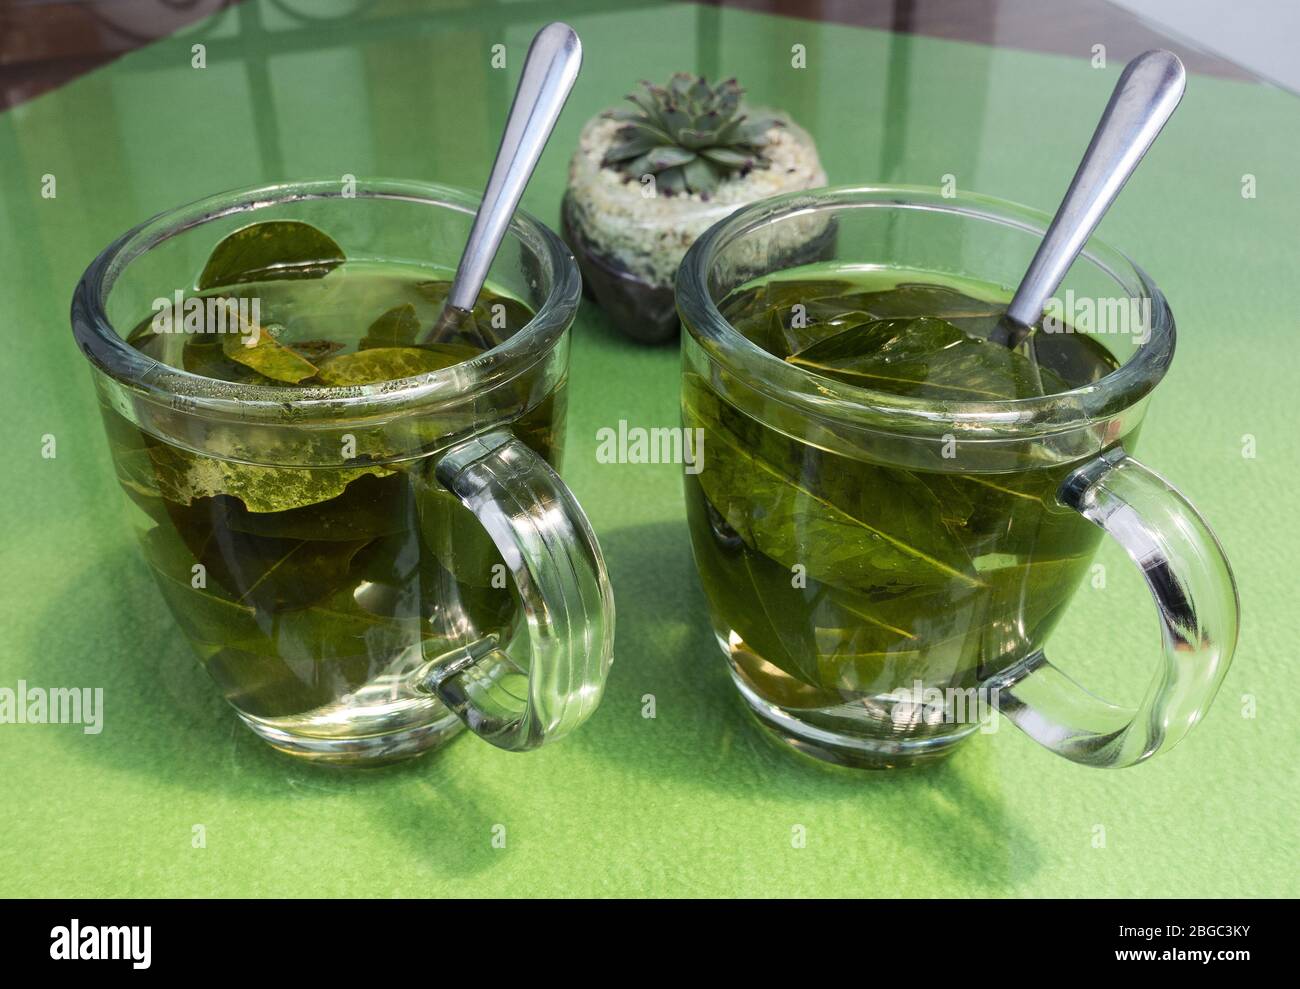 https://c8.alamy.com/comp/2BGC3KY/coca-tea-in-glass-cups-made-from-dried-leaves-of-the-coca-plant-which-is-native-to-south-america-2BGC3KY.jpg